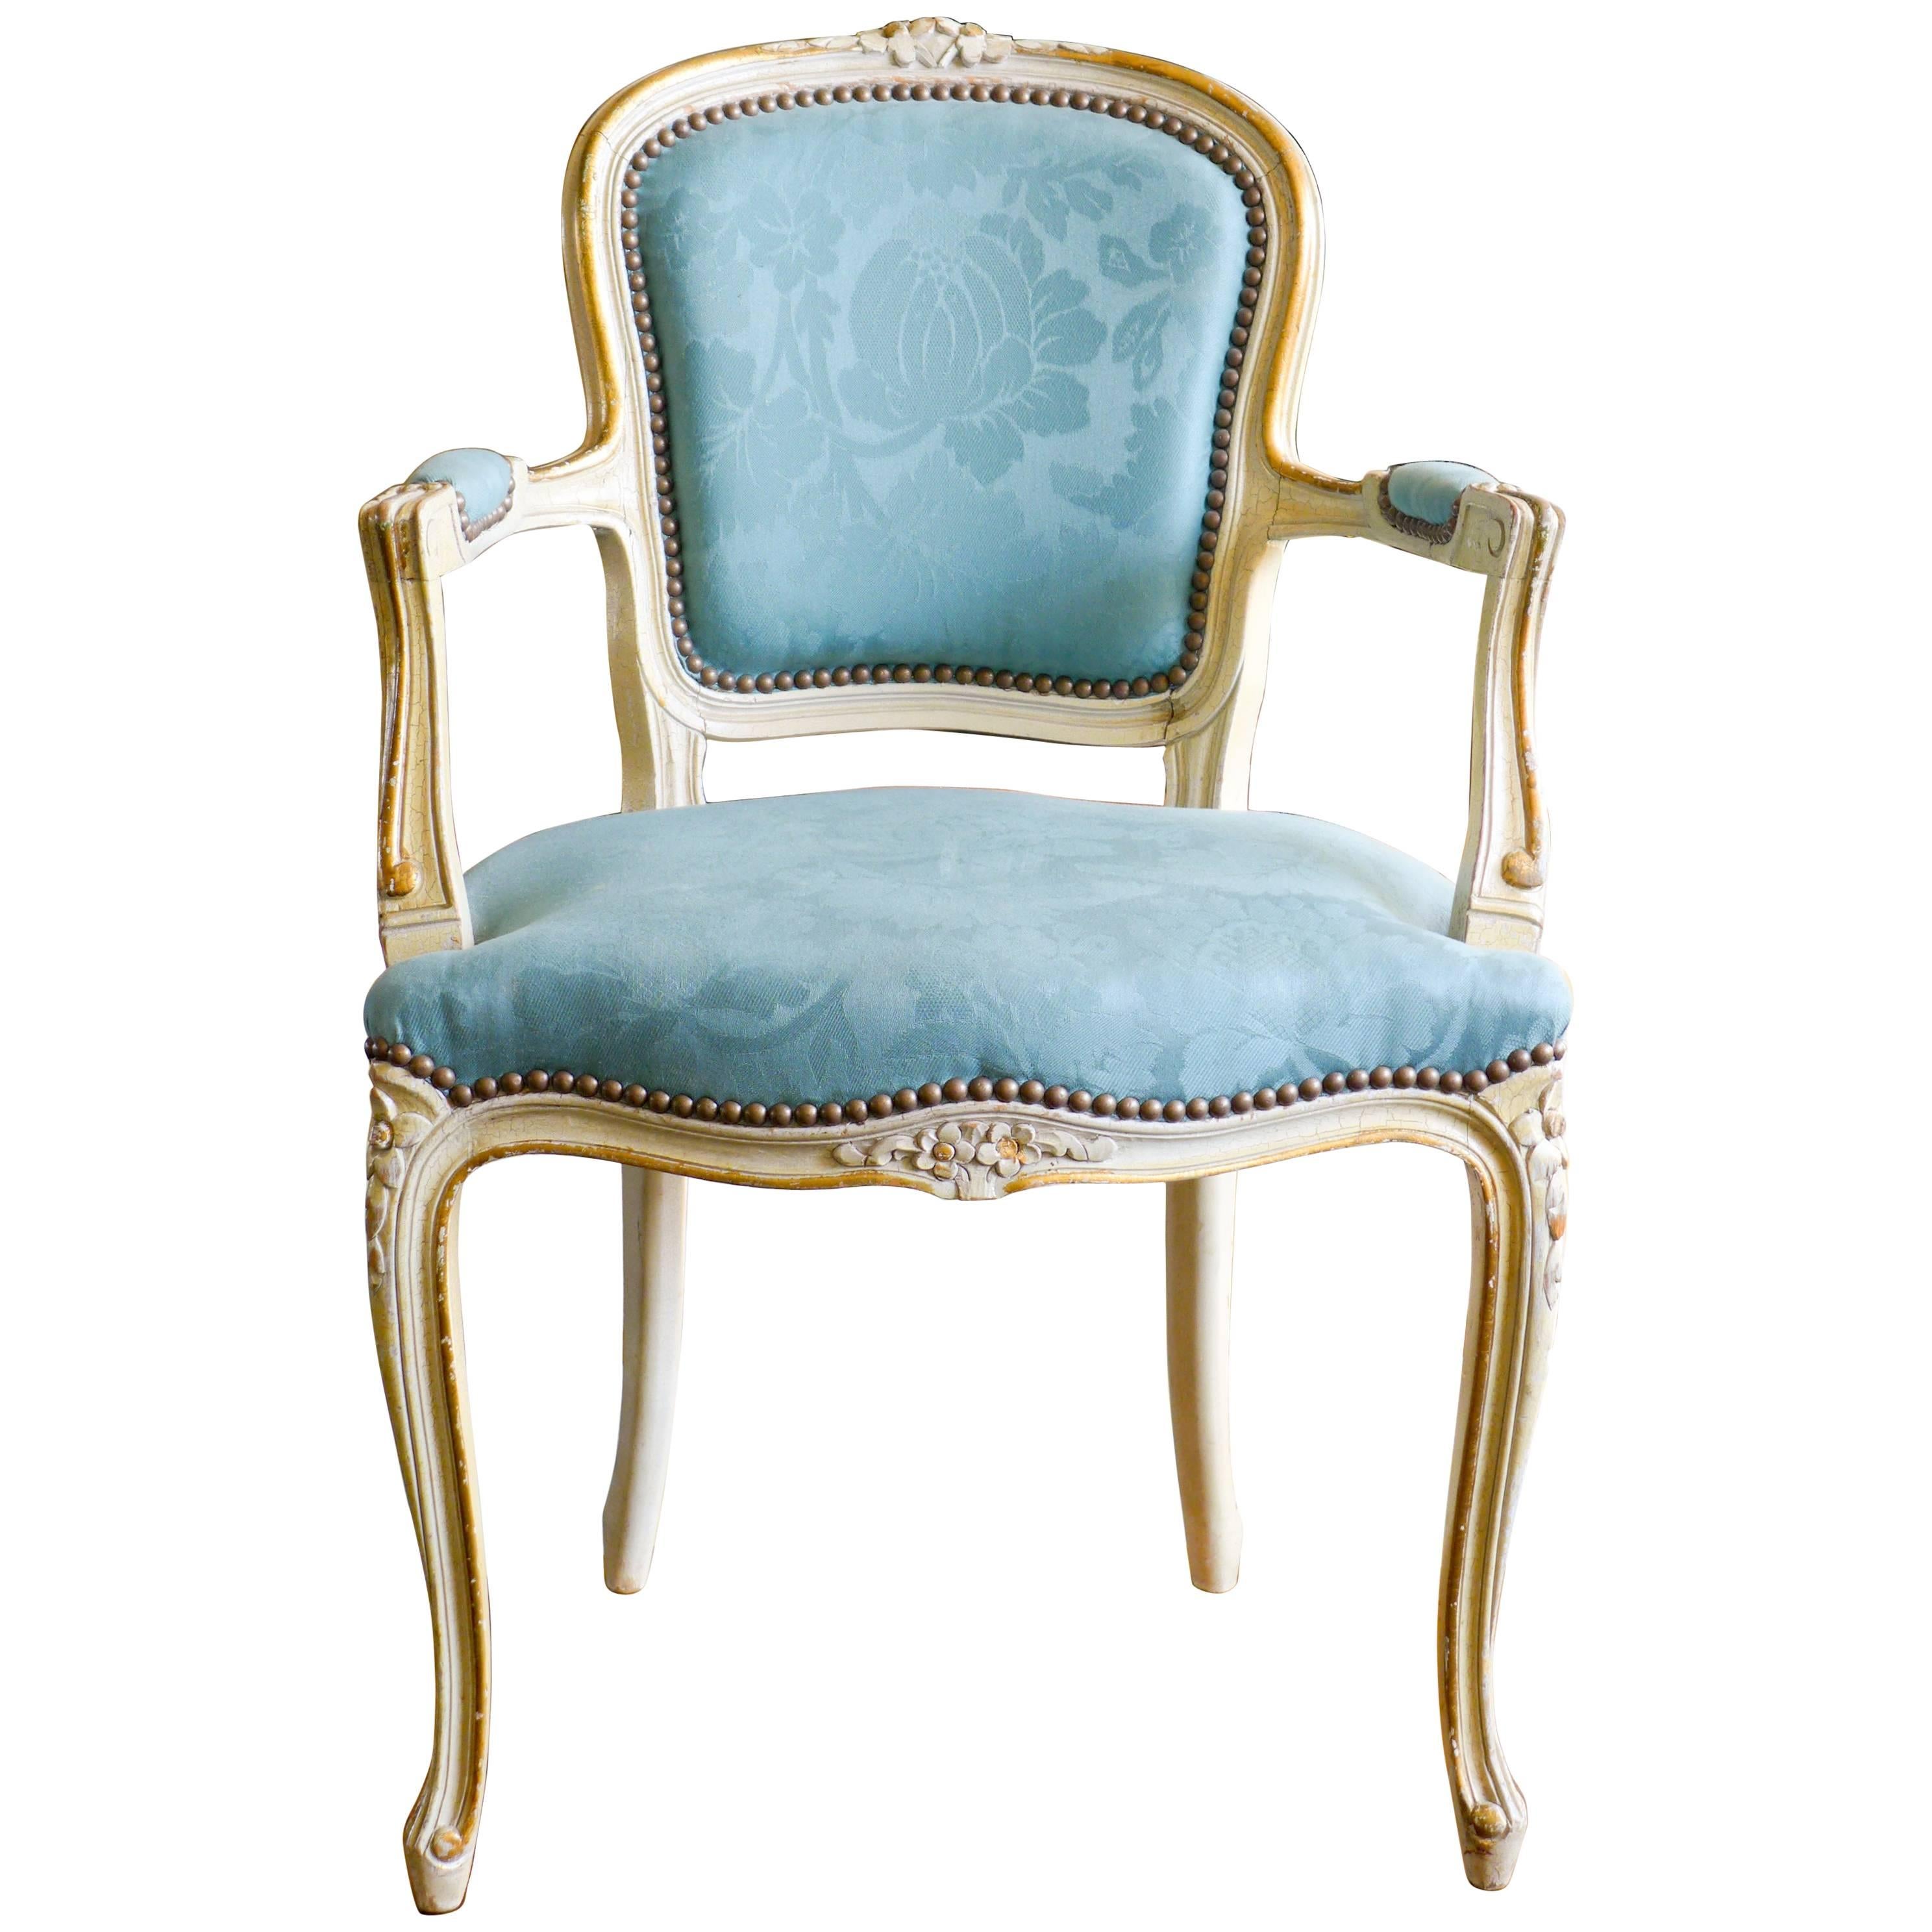 19th Century French Painted Armchair in Louis XV Style